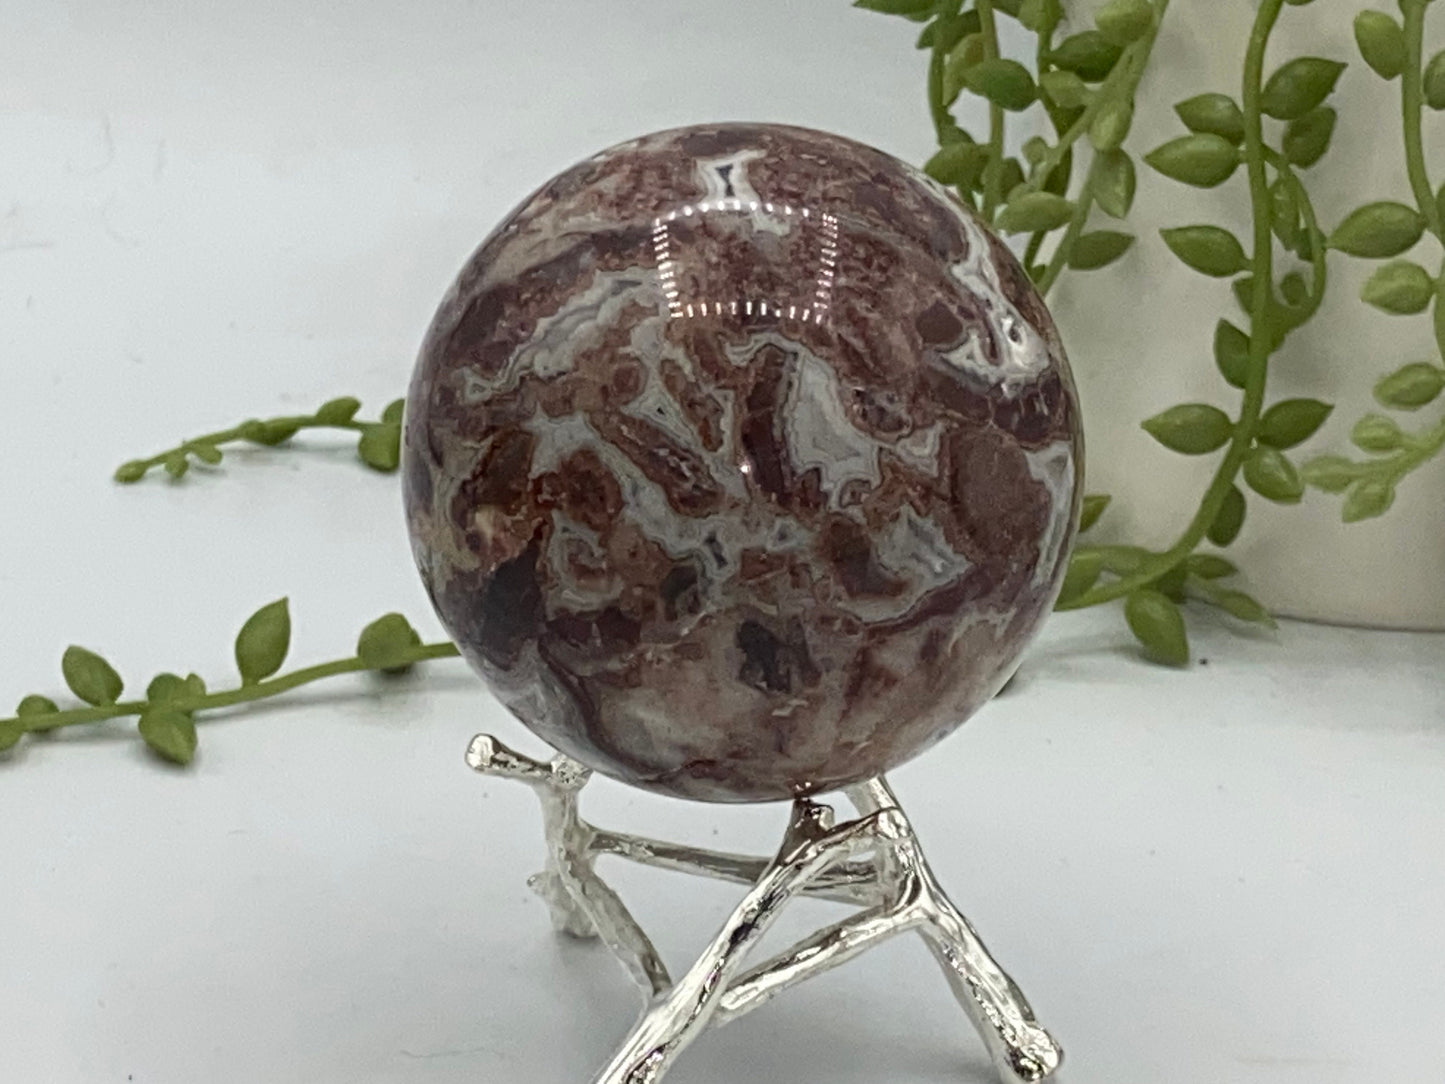 Natural Druzy Polished Mexican Lace Agate Sphere Ball, Banded Agate, Divination Ball, Crystal Heal, Chakra, Crystal Gift, Mineral Specimen